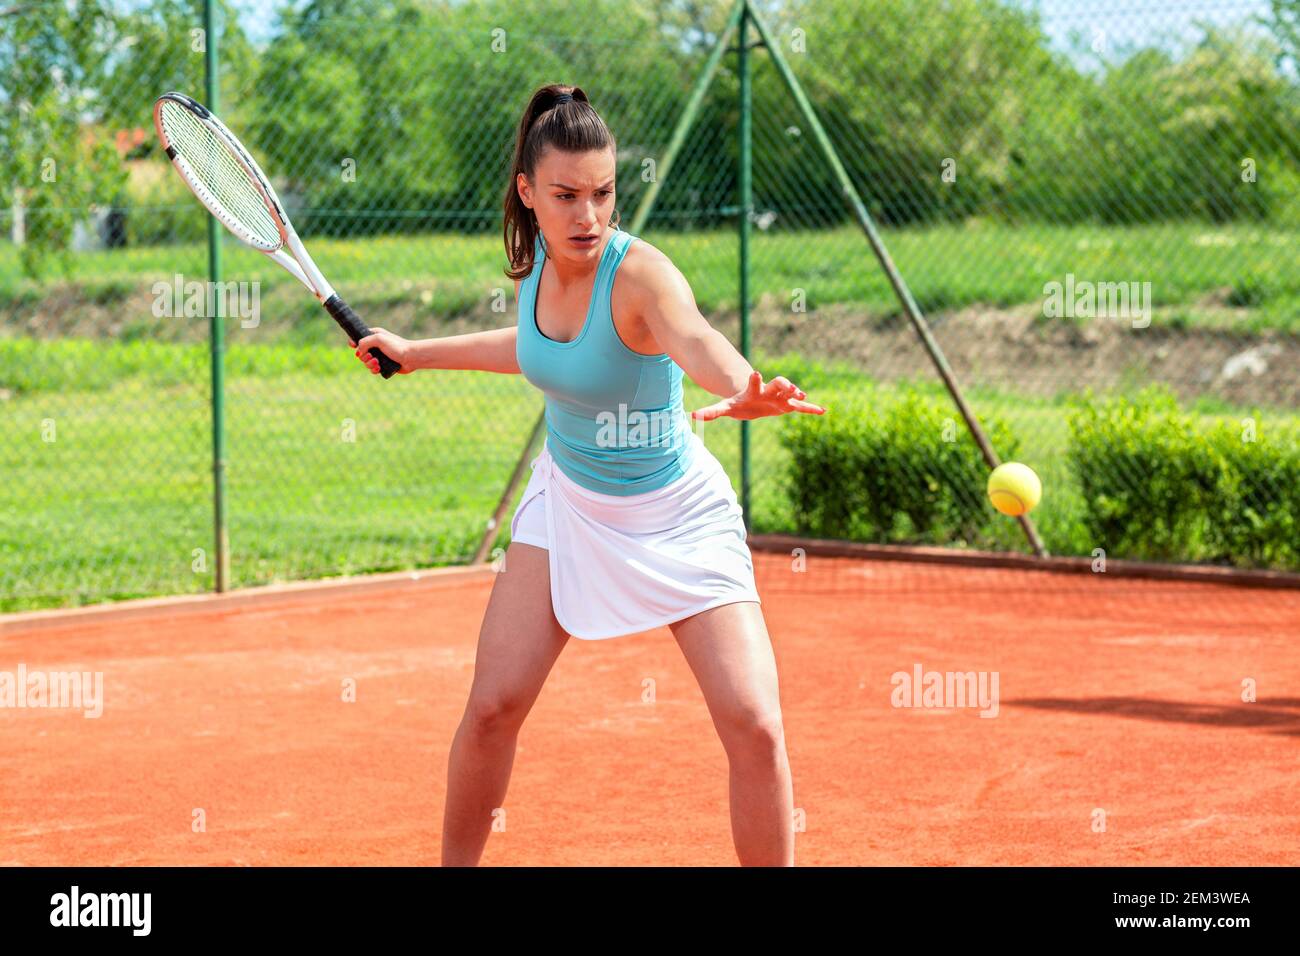 Beautiful girl fully concentrated to hit a tennis ball with a forehand  stroke Stock Photo - Alamy